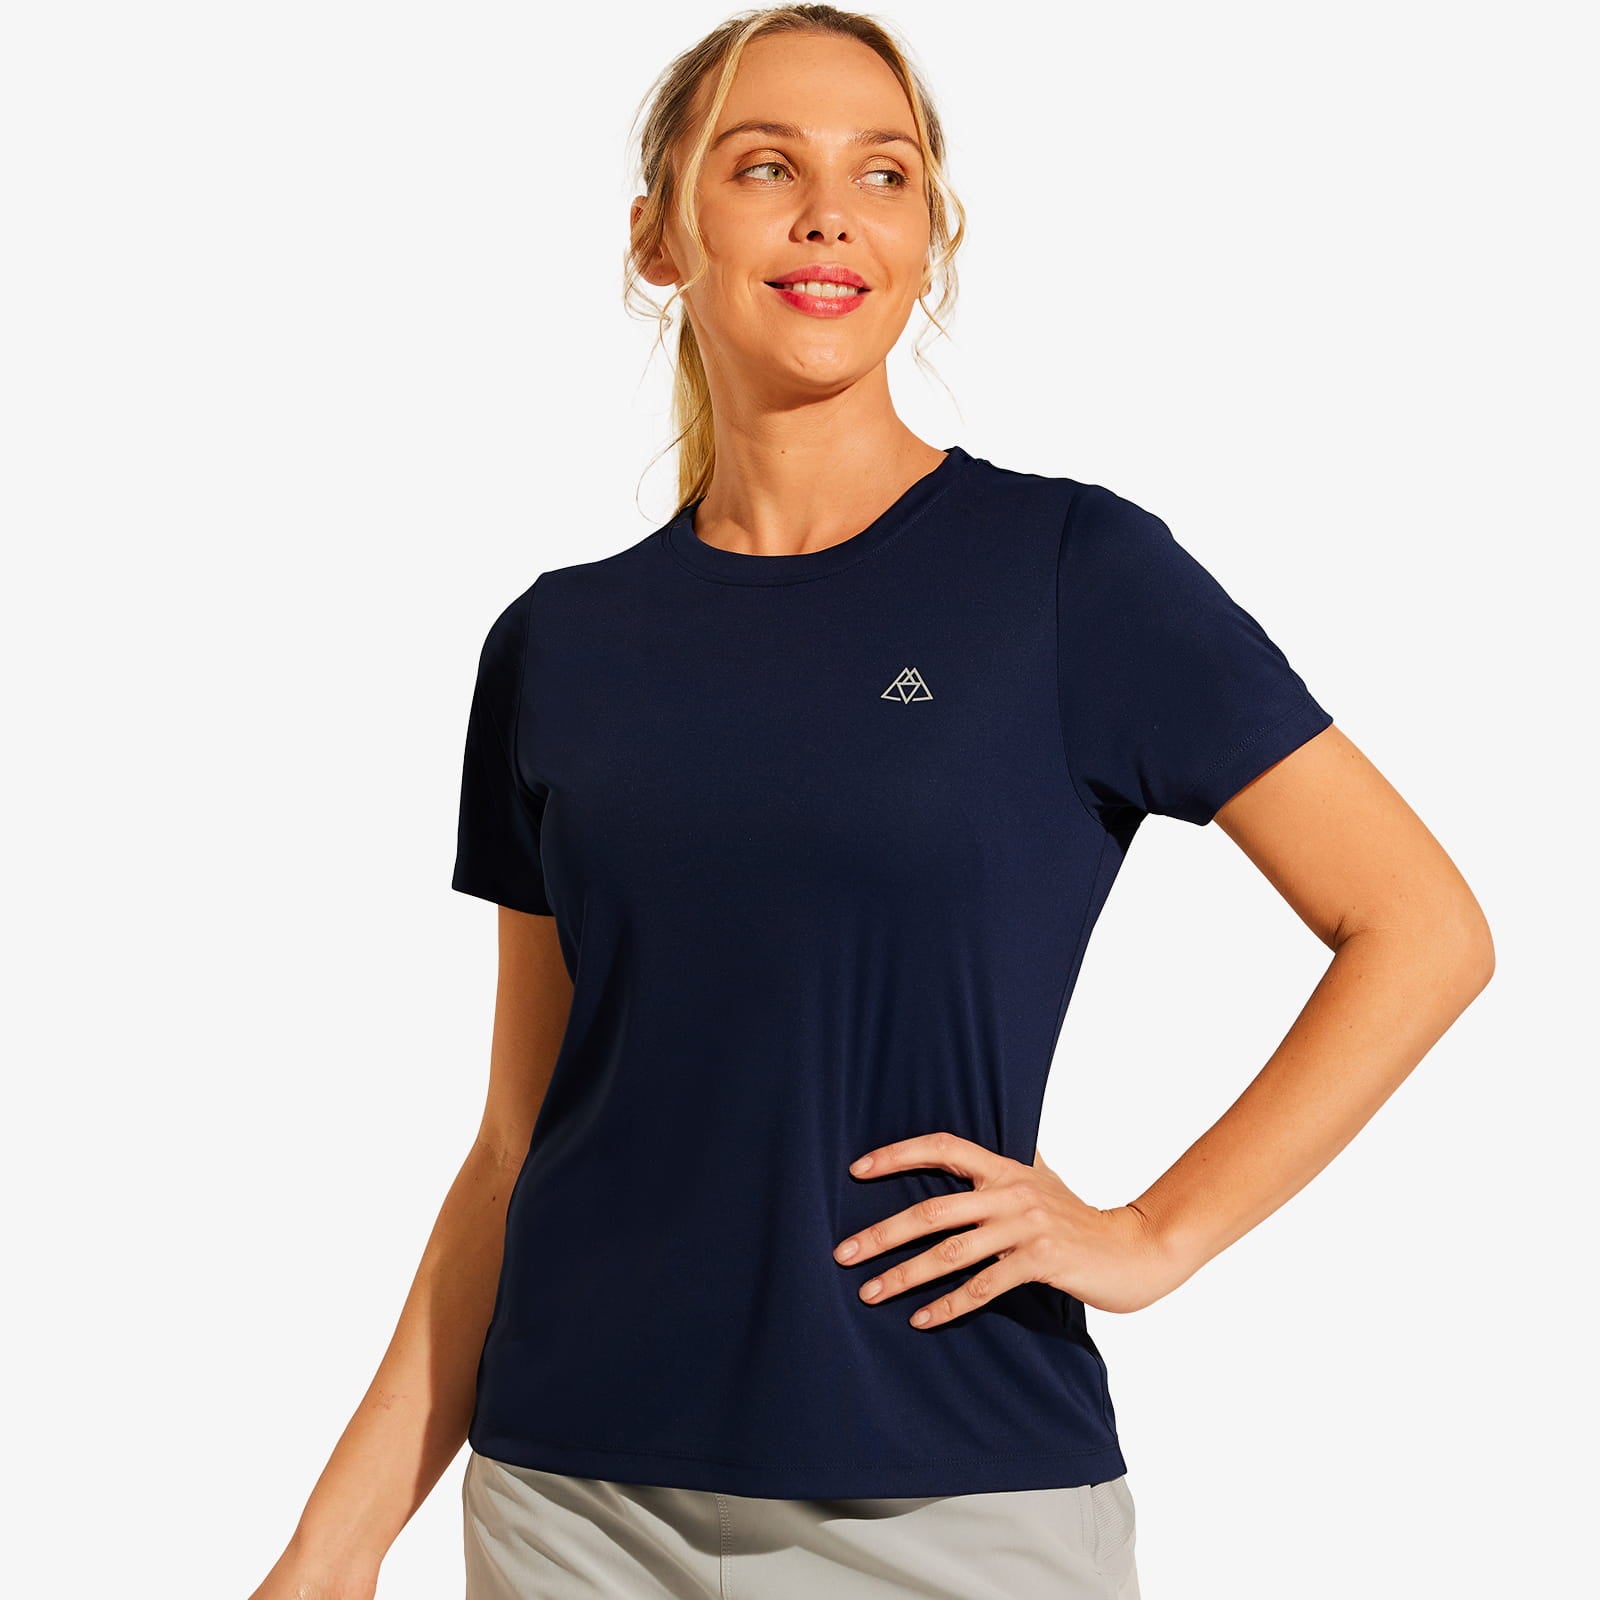 Haimont Women's Athletic Running T-Shirts Dry Fit Shirts